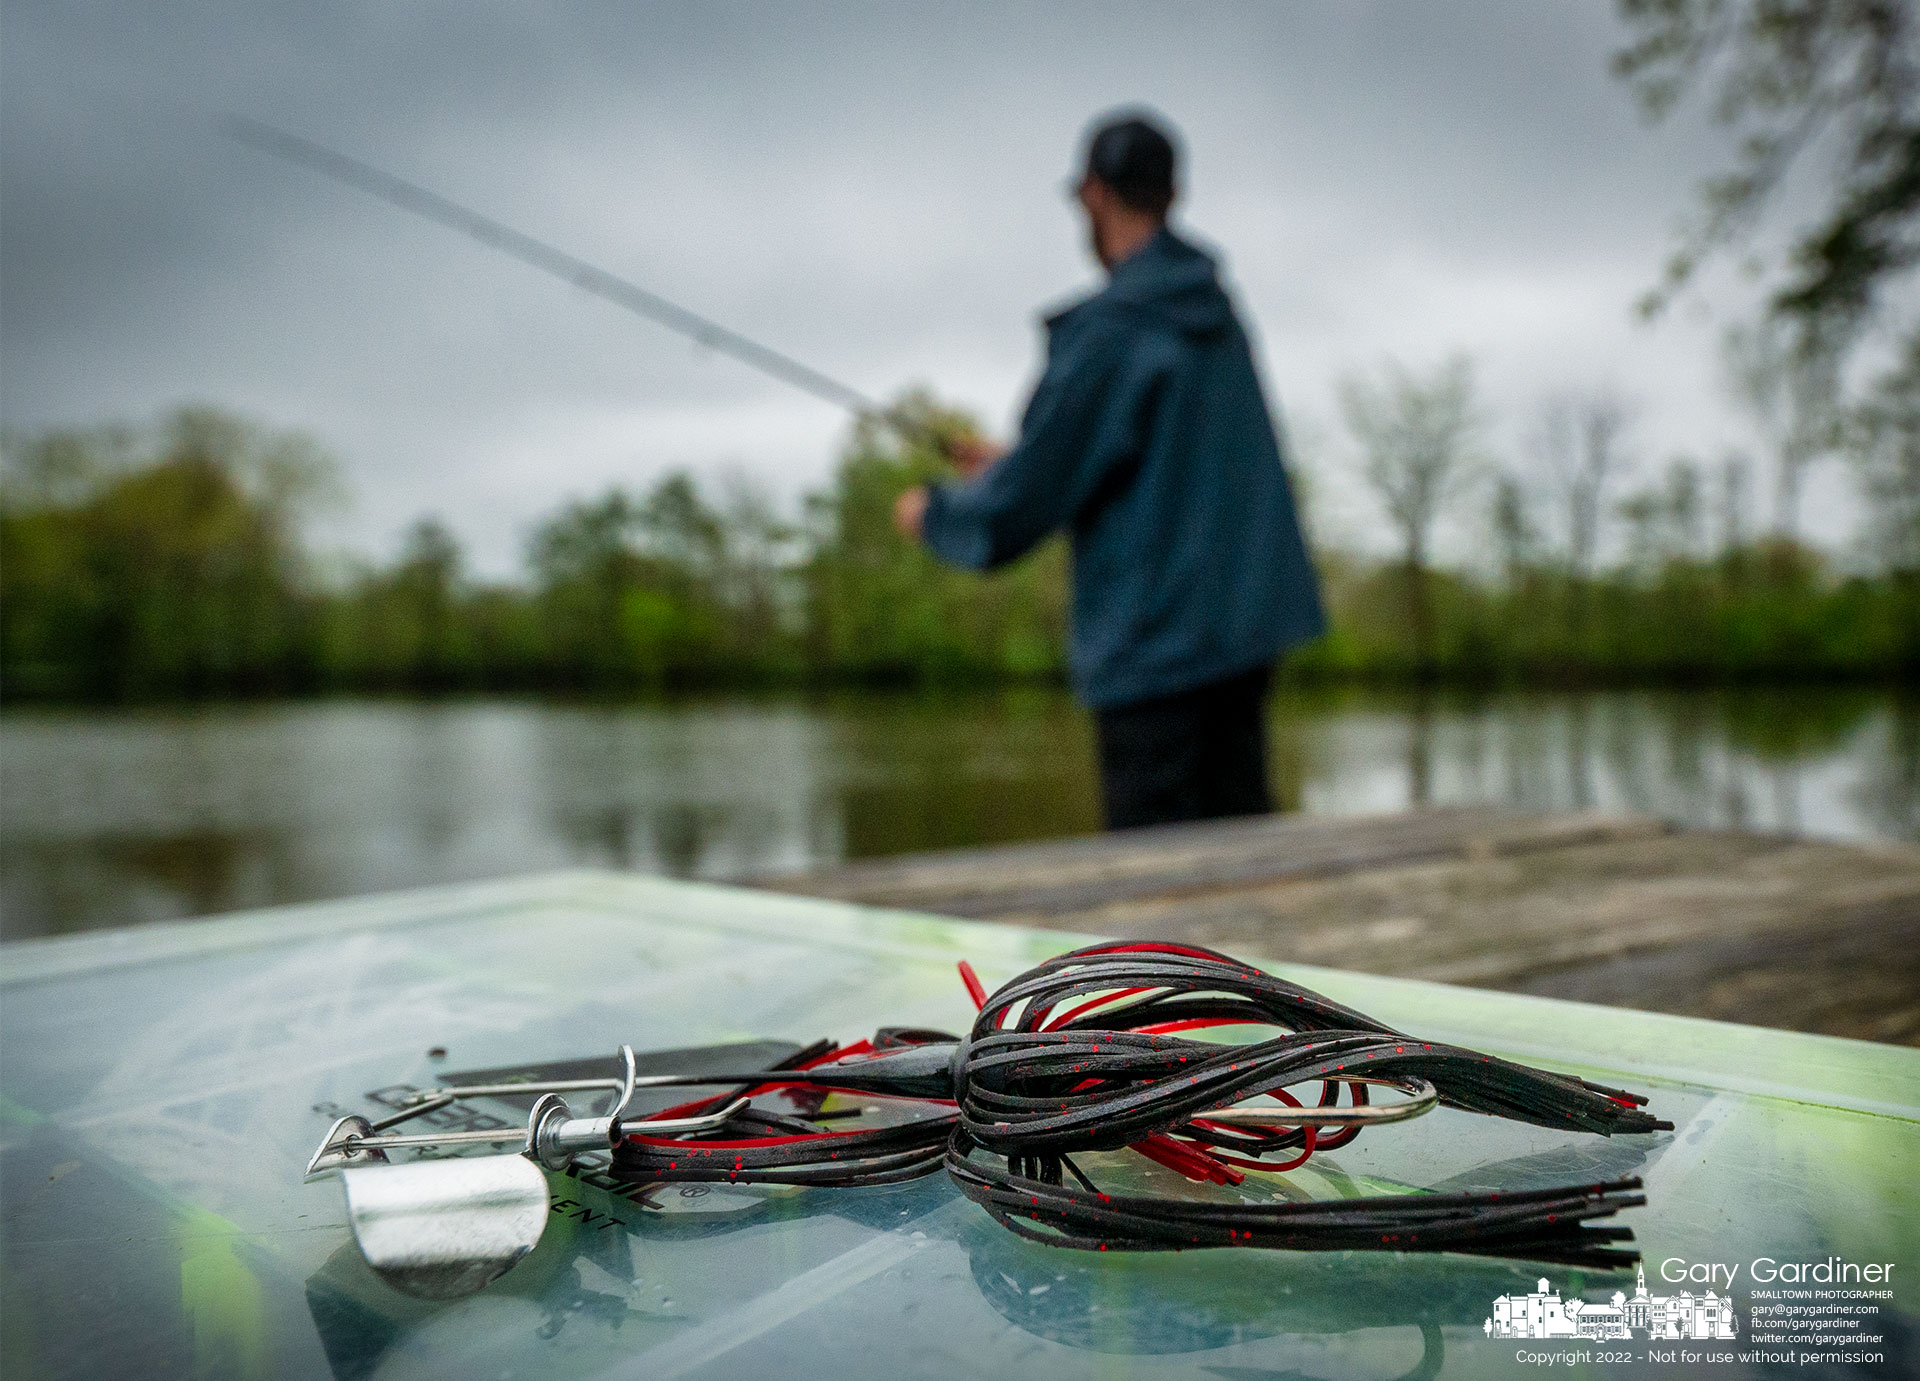 A fisherman's lure sits on part of his tackle box after he chose another when the lure failed to attract any fish in Schrock Lake at Sharon Woods Park. My Final Photo for May 6, 2022.